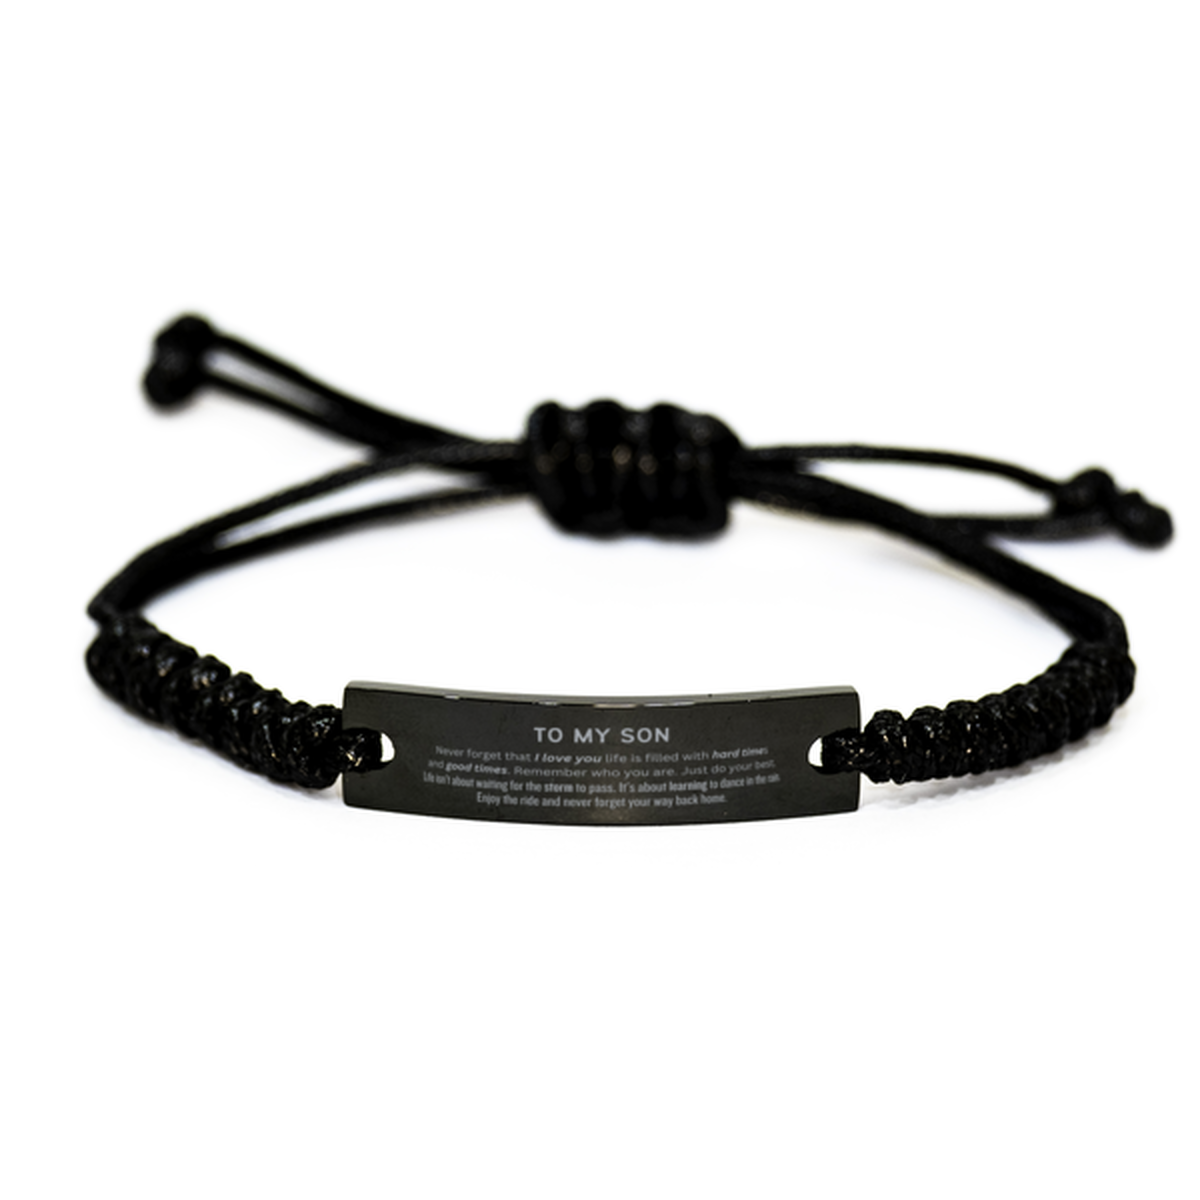 Christmas Son Black Rope Bracelet Gifts, To My Son Birthday Thank You Gifts For Son, Graduation Unique Gifts For Son To My Son Never forget that I love you life is filled with hard times and good times. Remember who you are. Just do your best